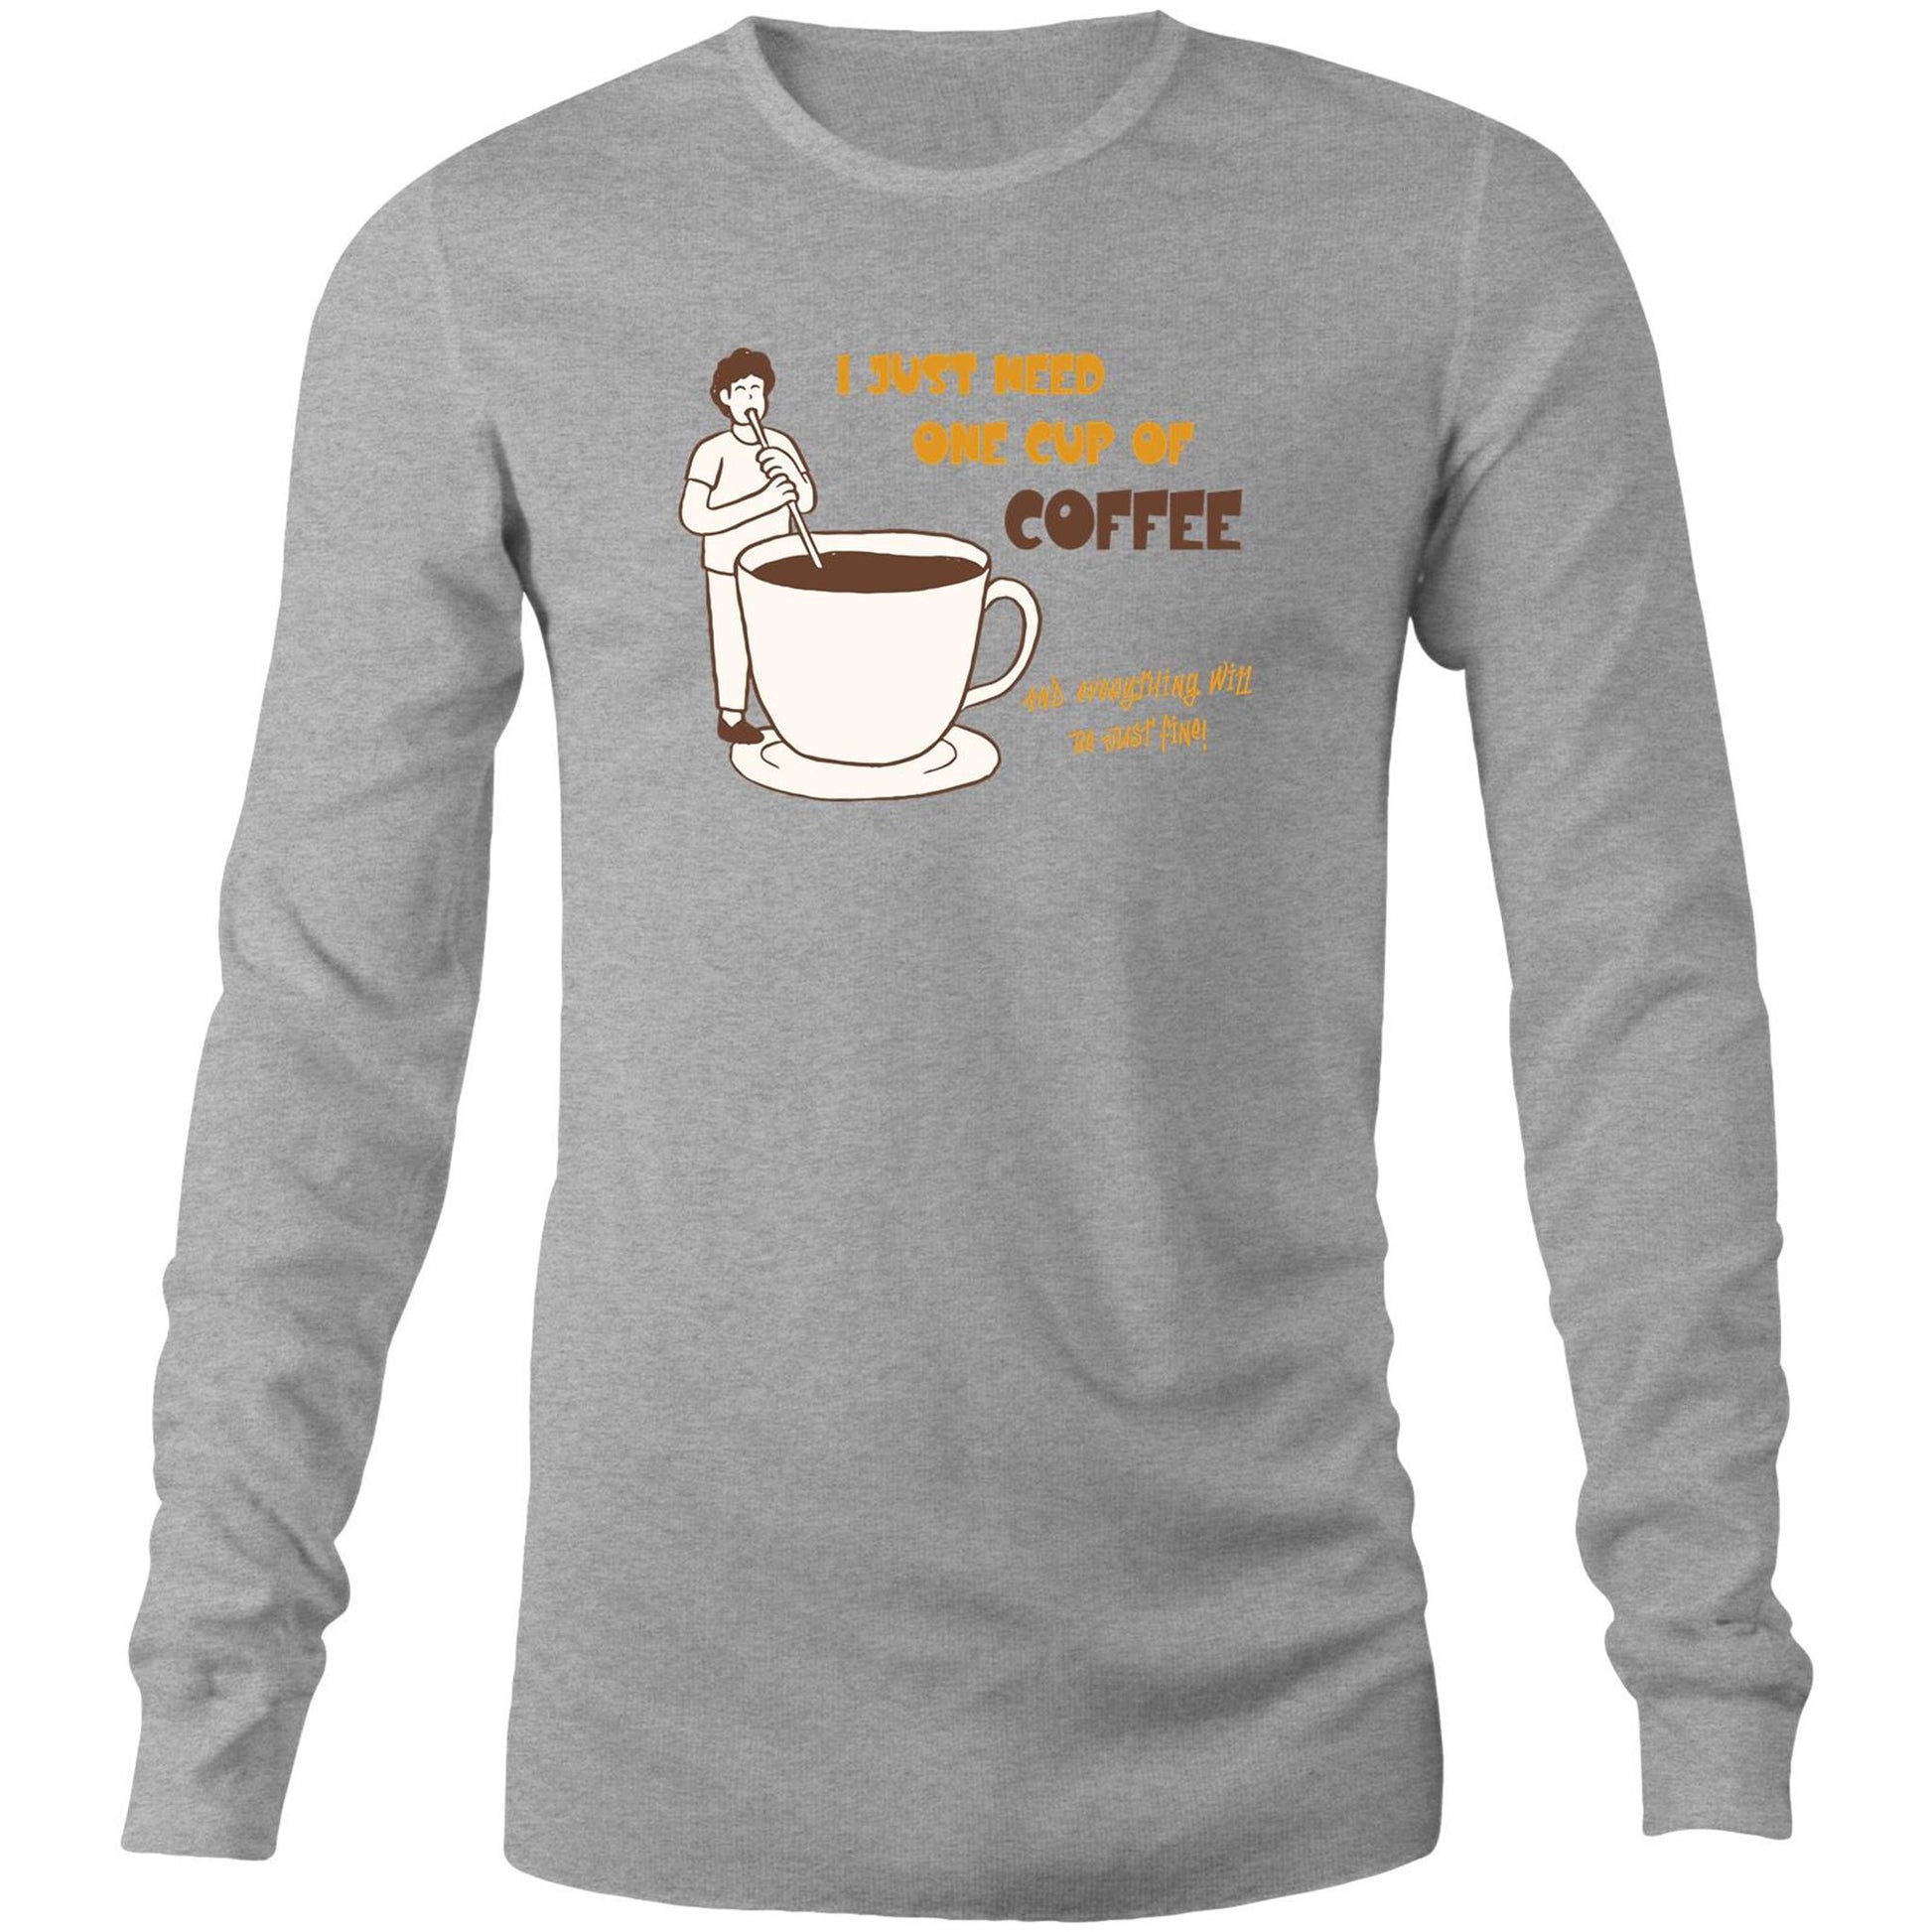 I Just Need One Cup Of Coffee And Everything Will Be Just Fine - Long Sleeve T-Shirt Grey Marle Unisex Long Sleeve T-shirt Coffee